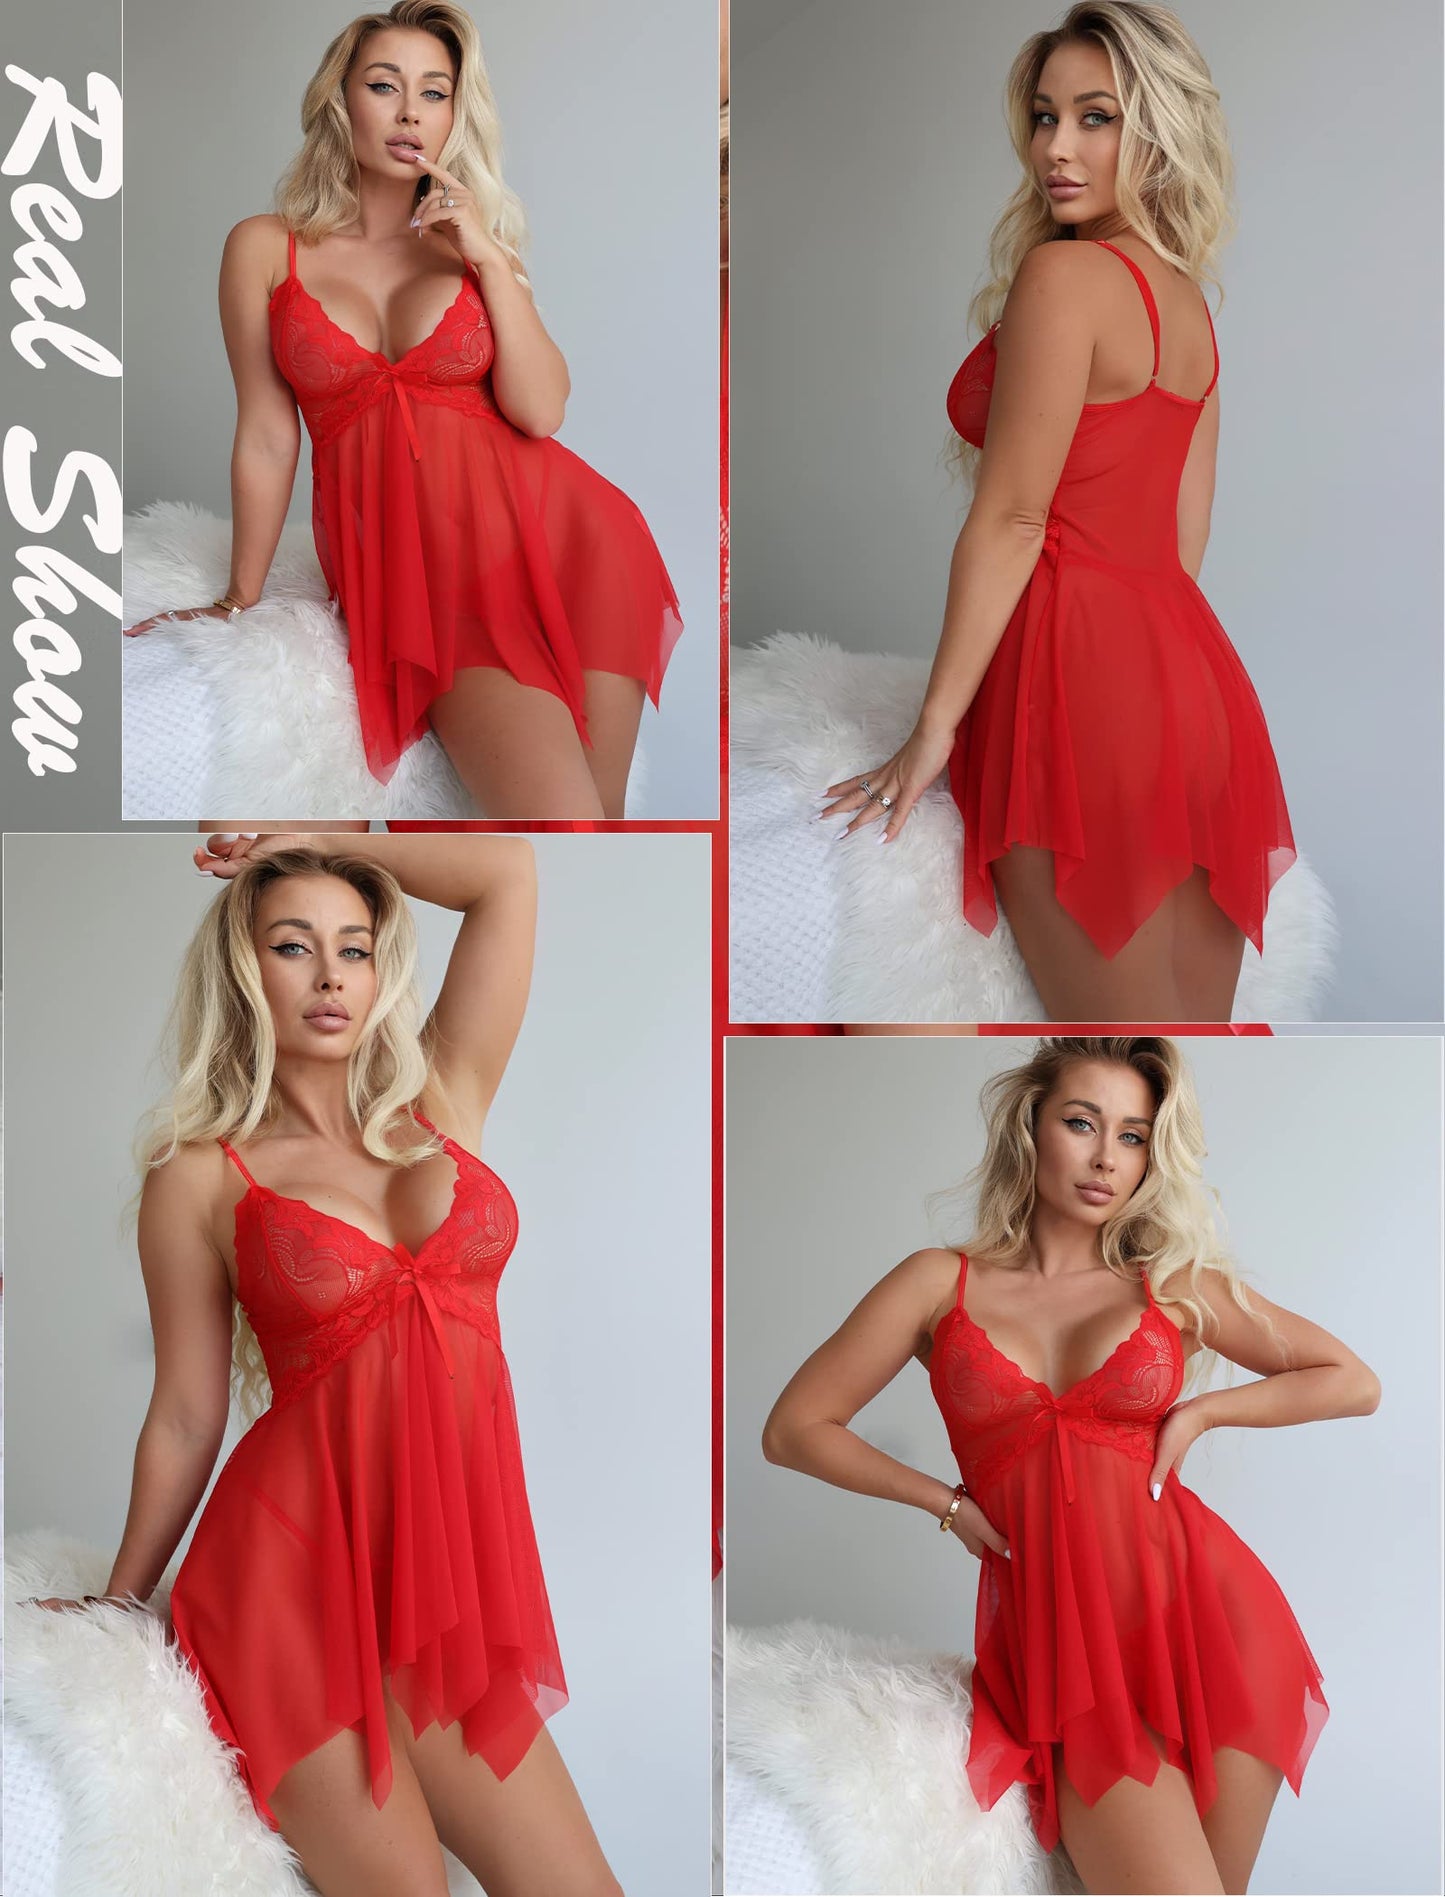 Avidlove Valentines Lingerie For Women For Sex Play Slutty Lingerie for Sex Lace Babydoll Lingerie Red XS